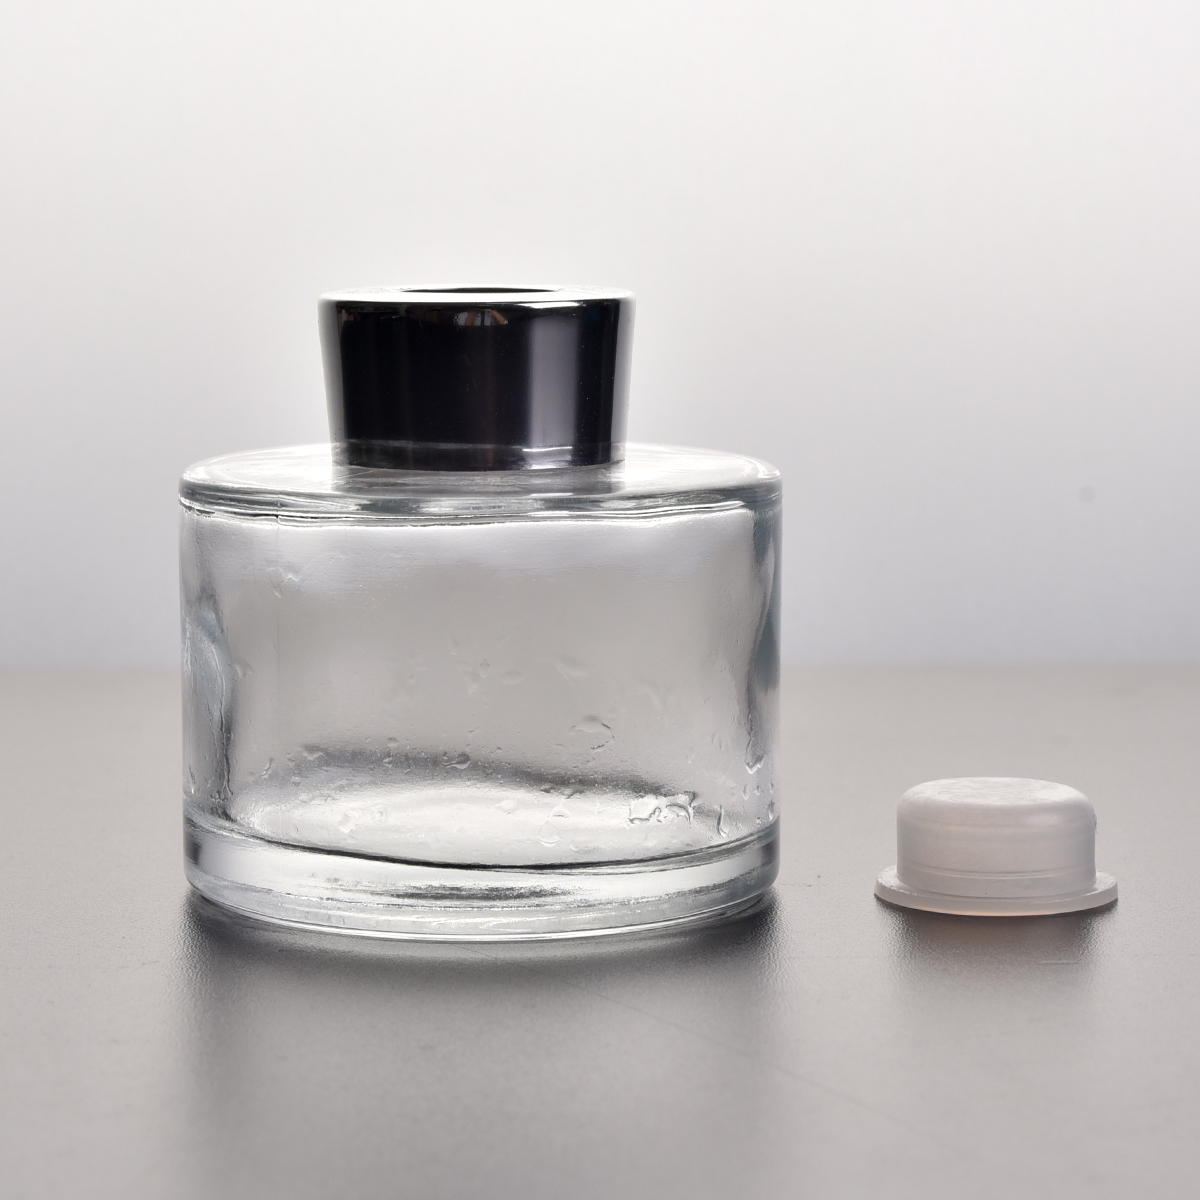 200ml stock diffuser bottle with cap and stopper